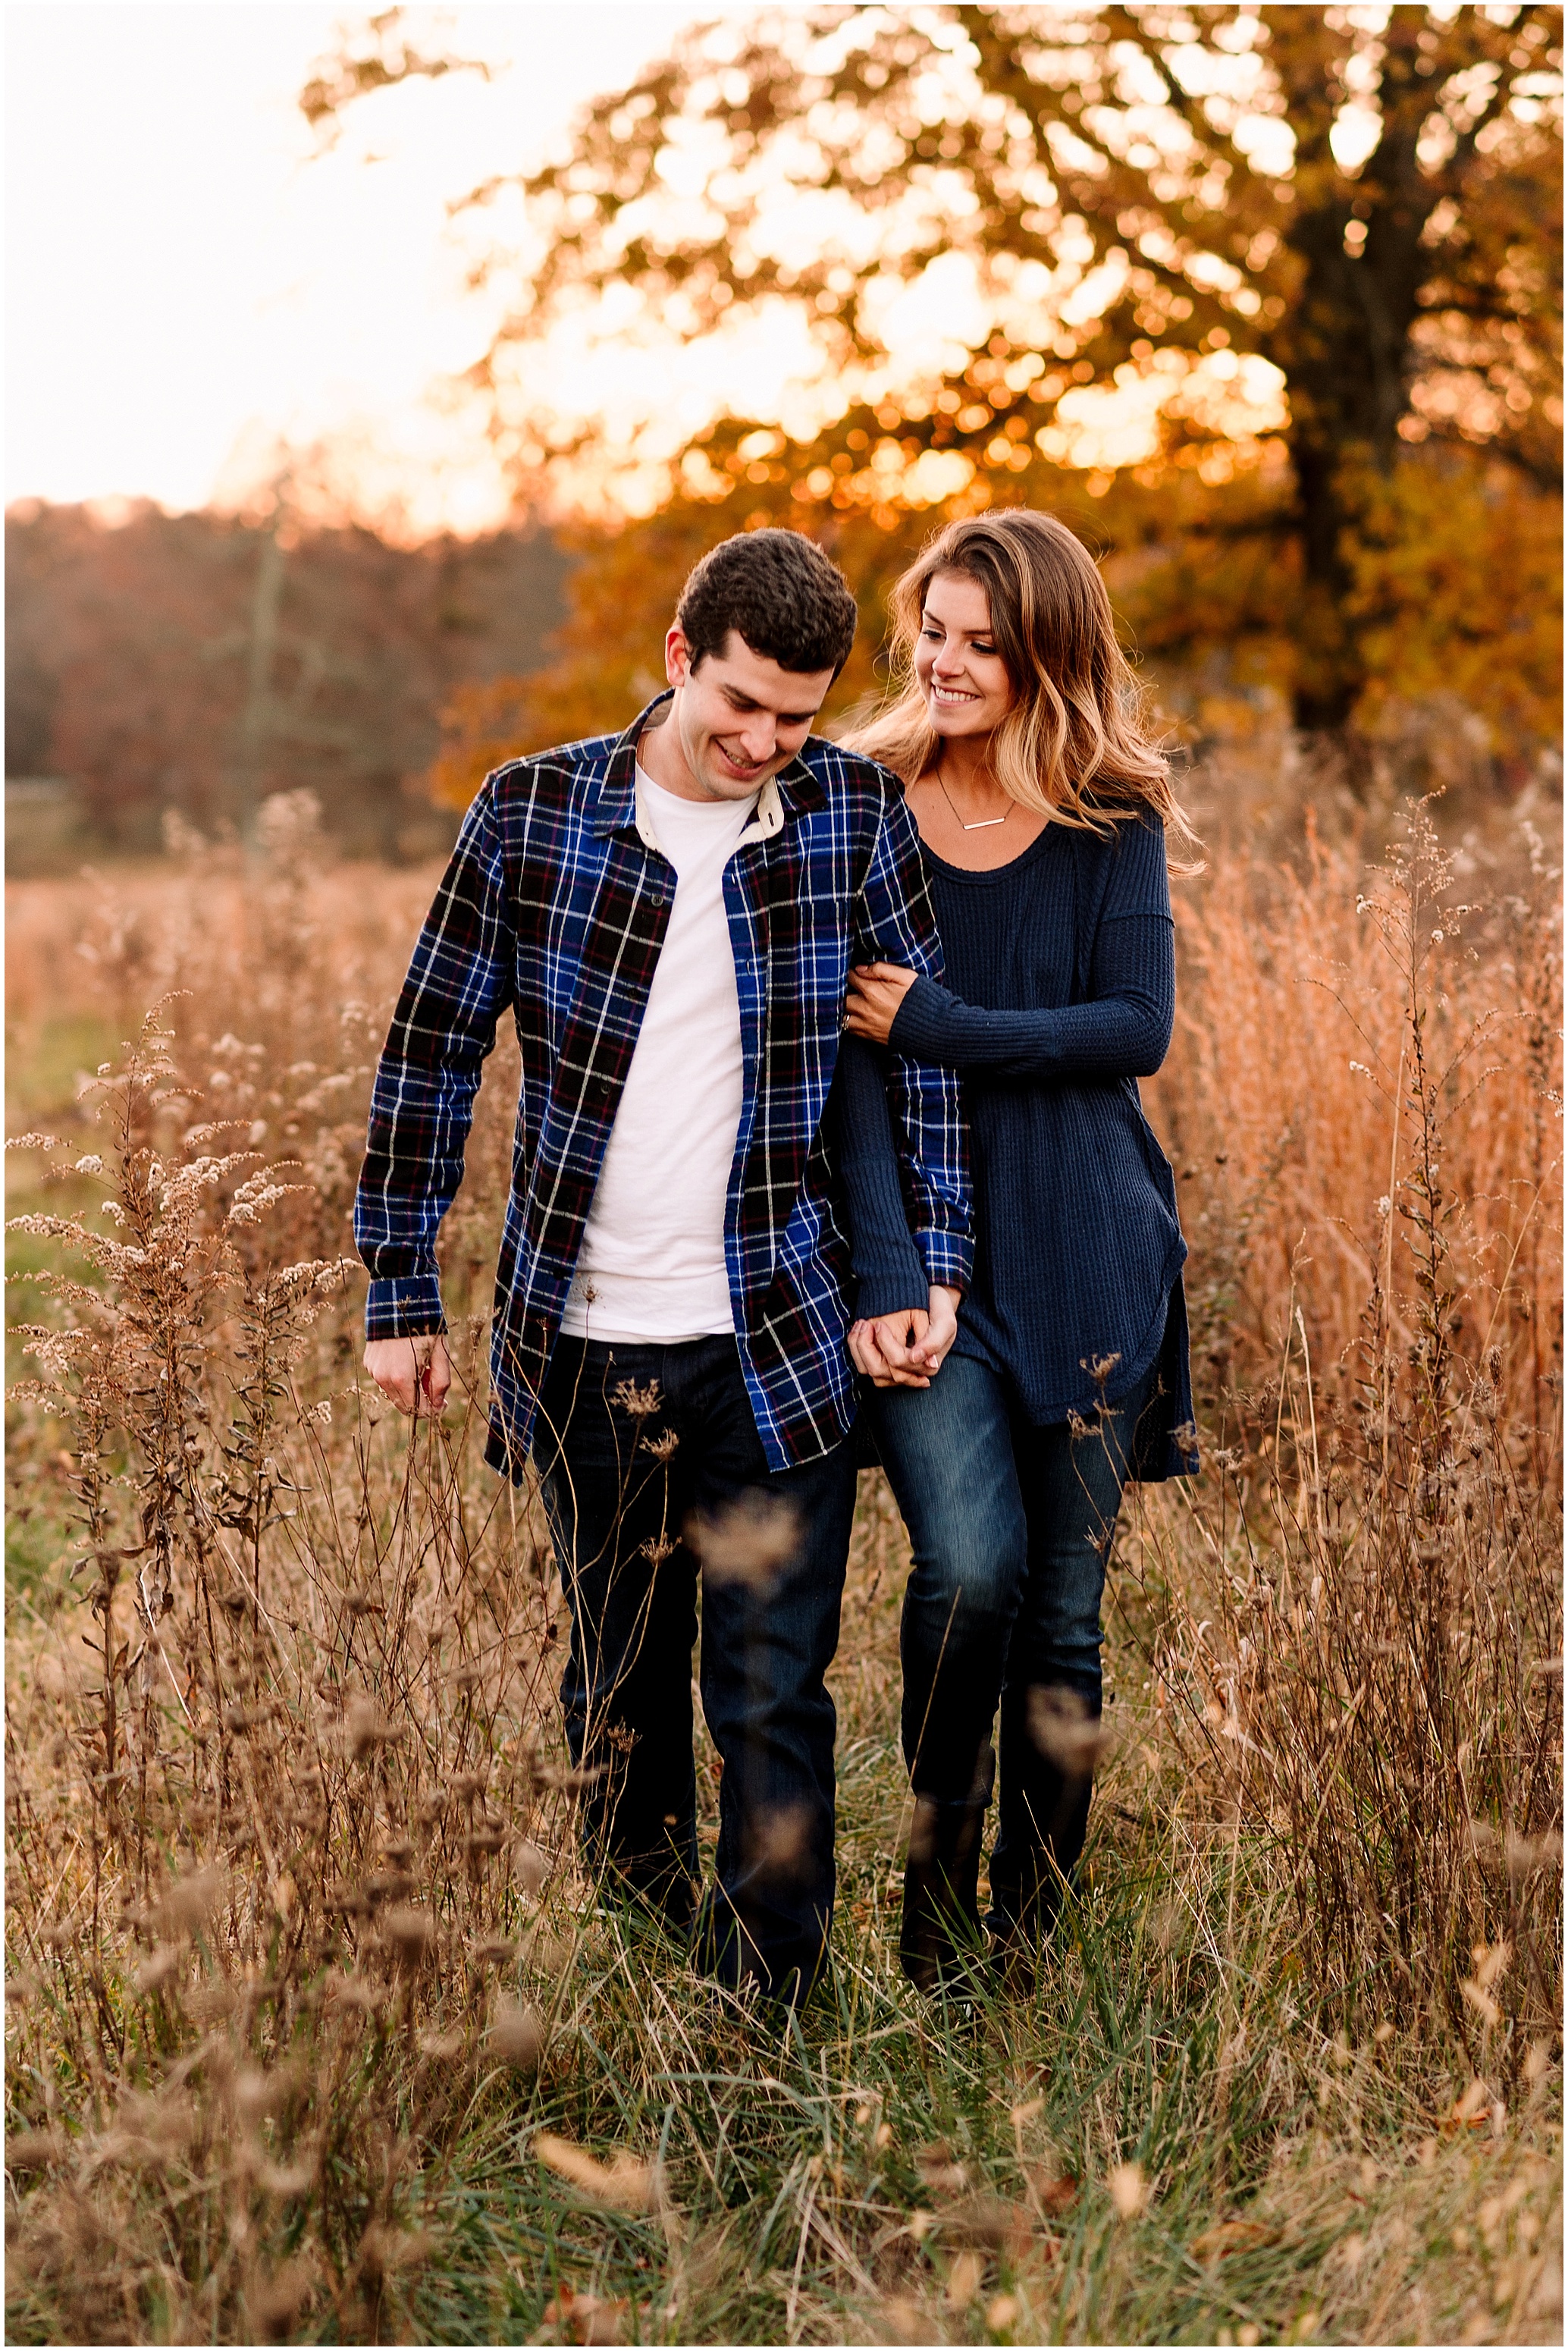 Hannah Leigh Photography Ellicott City MD Engagement Session_6949.jpg